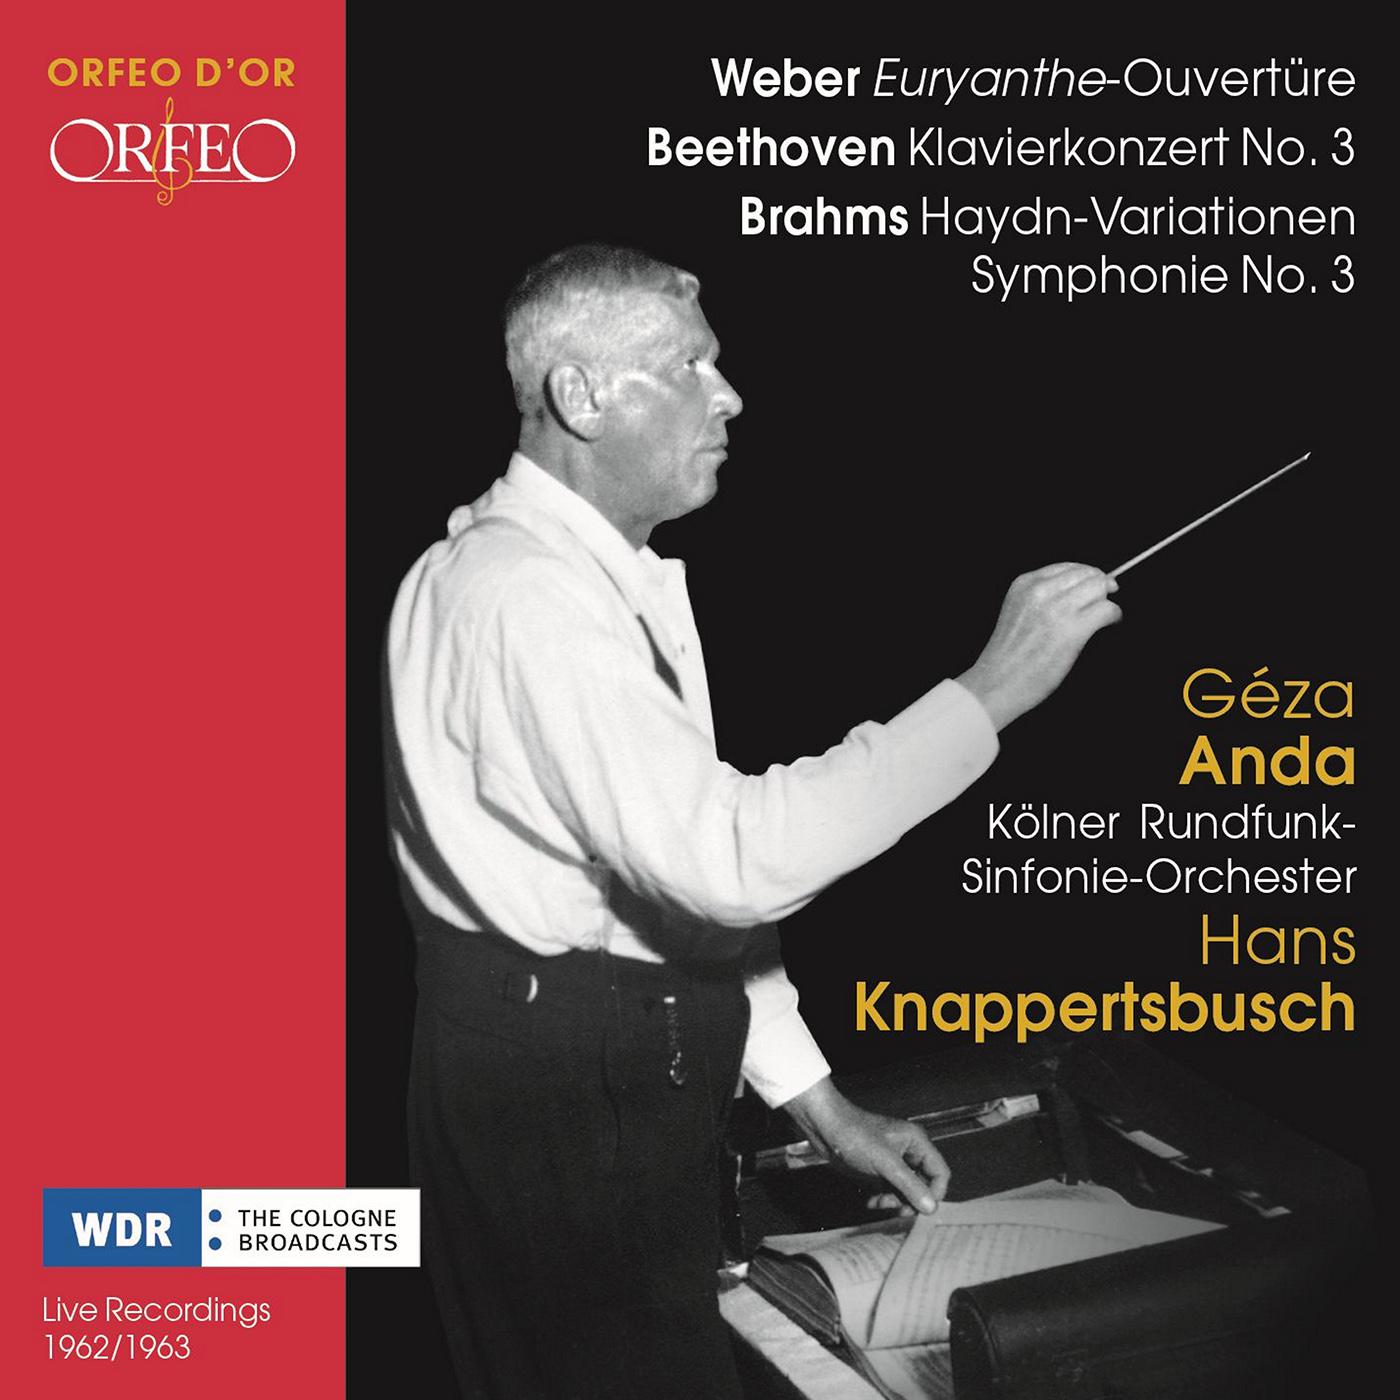 West German Radio Symphony Orchestra - Variations on a Theme by Haydn, Op. 56a, 